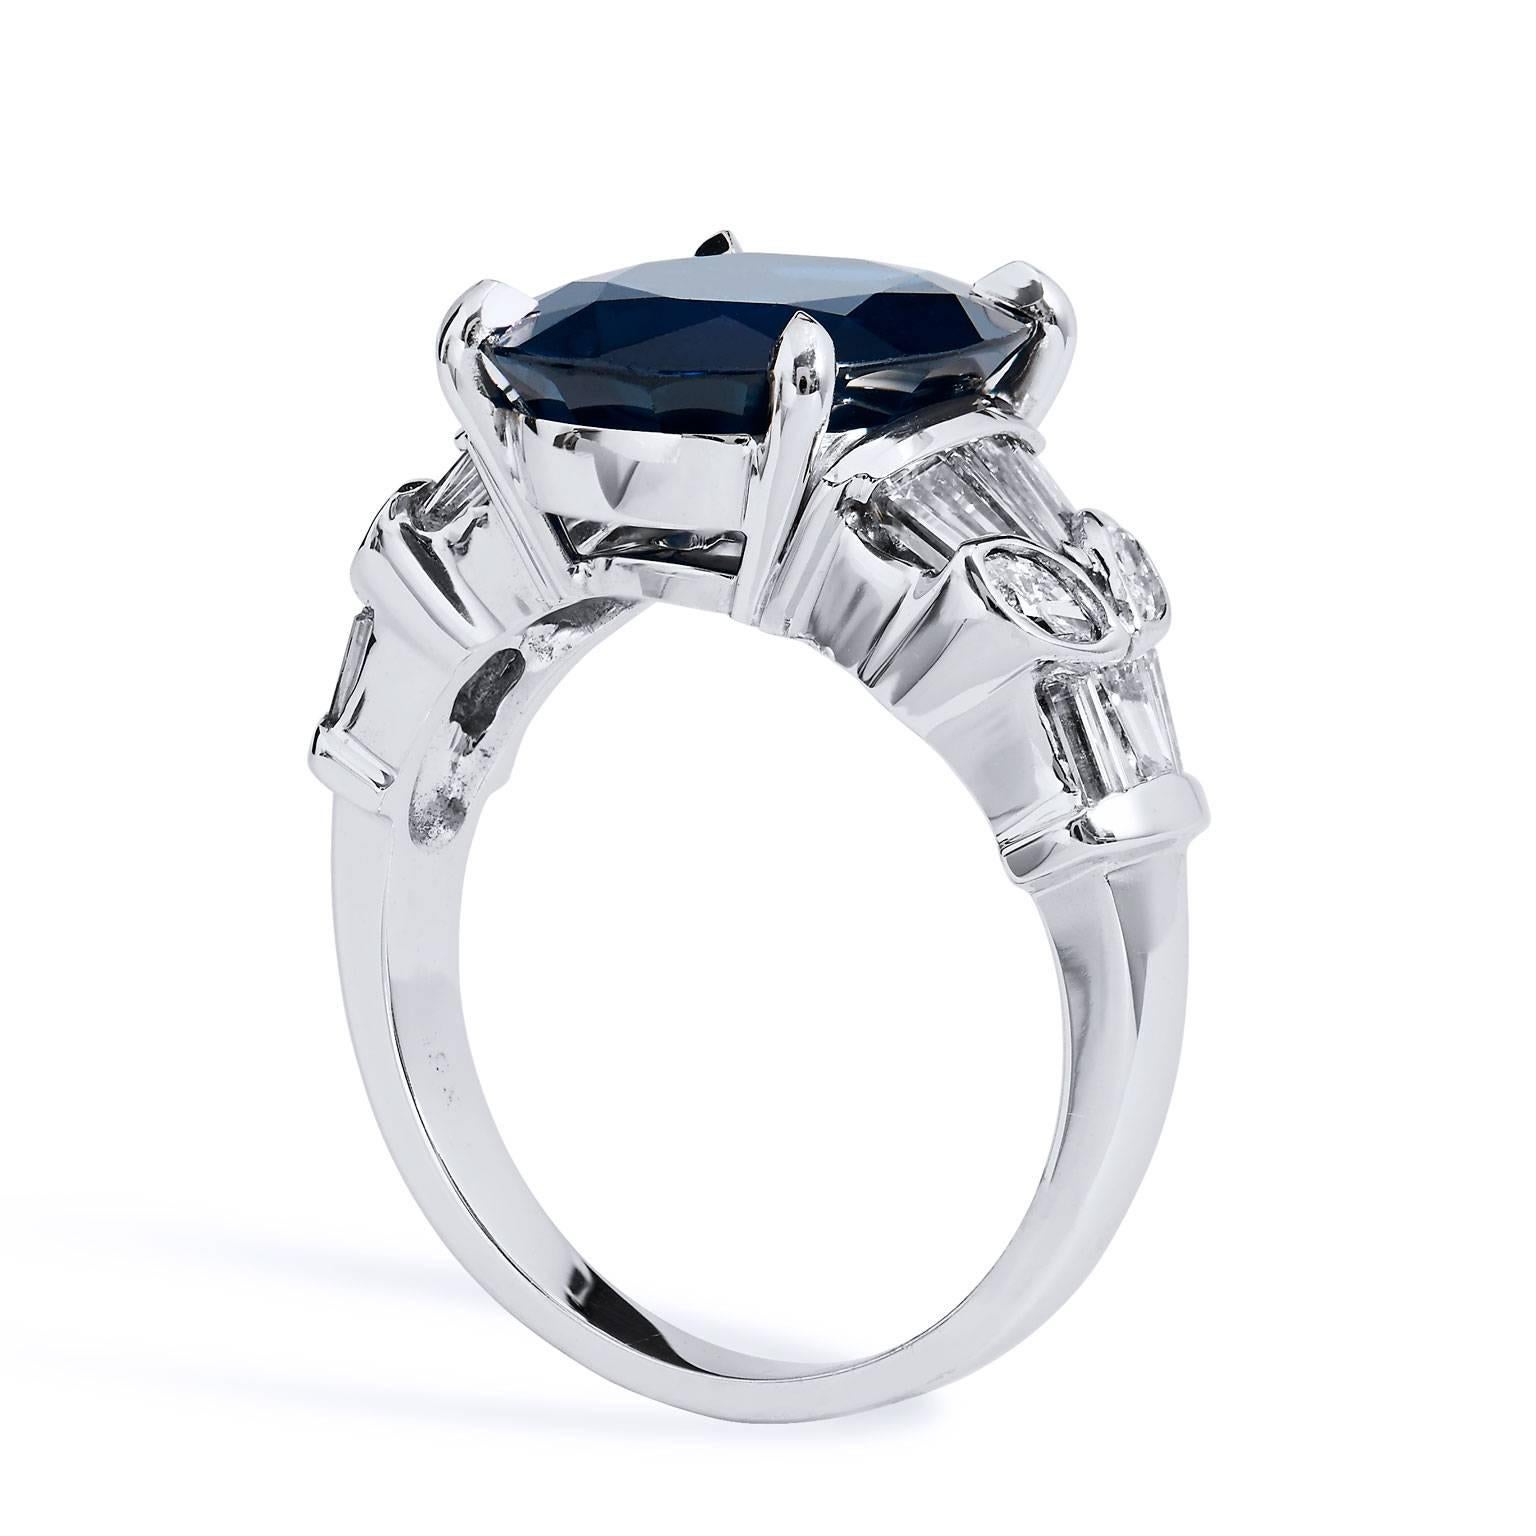 Reflect stately elegance with this blue sapphire, diamond and 18 karat white gold ring. A 7.44 carat oval blue sapphire is set at center (GIA #5172542810), while 1.50 carat of baquette and oval accent diamonds, arranged in a stylized and fanciful